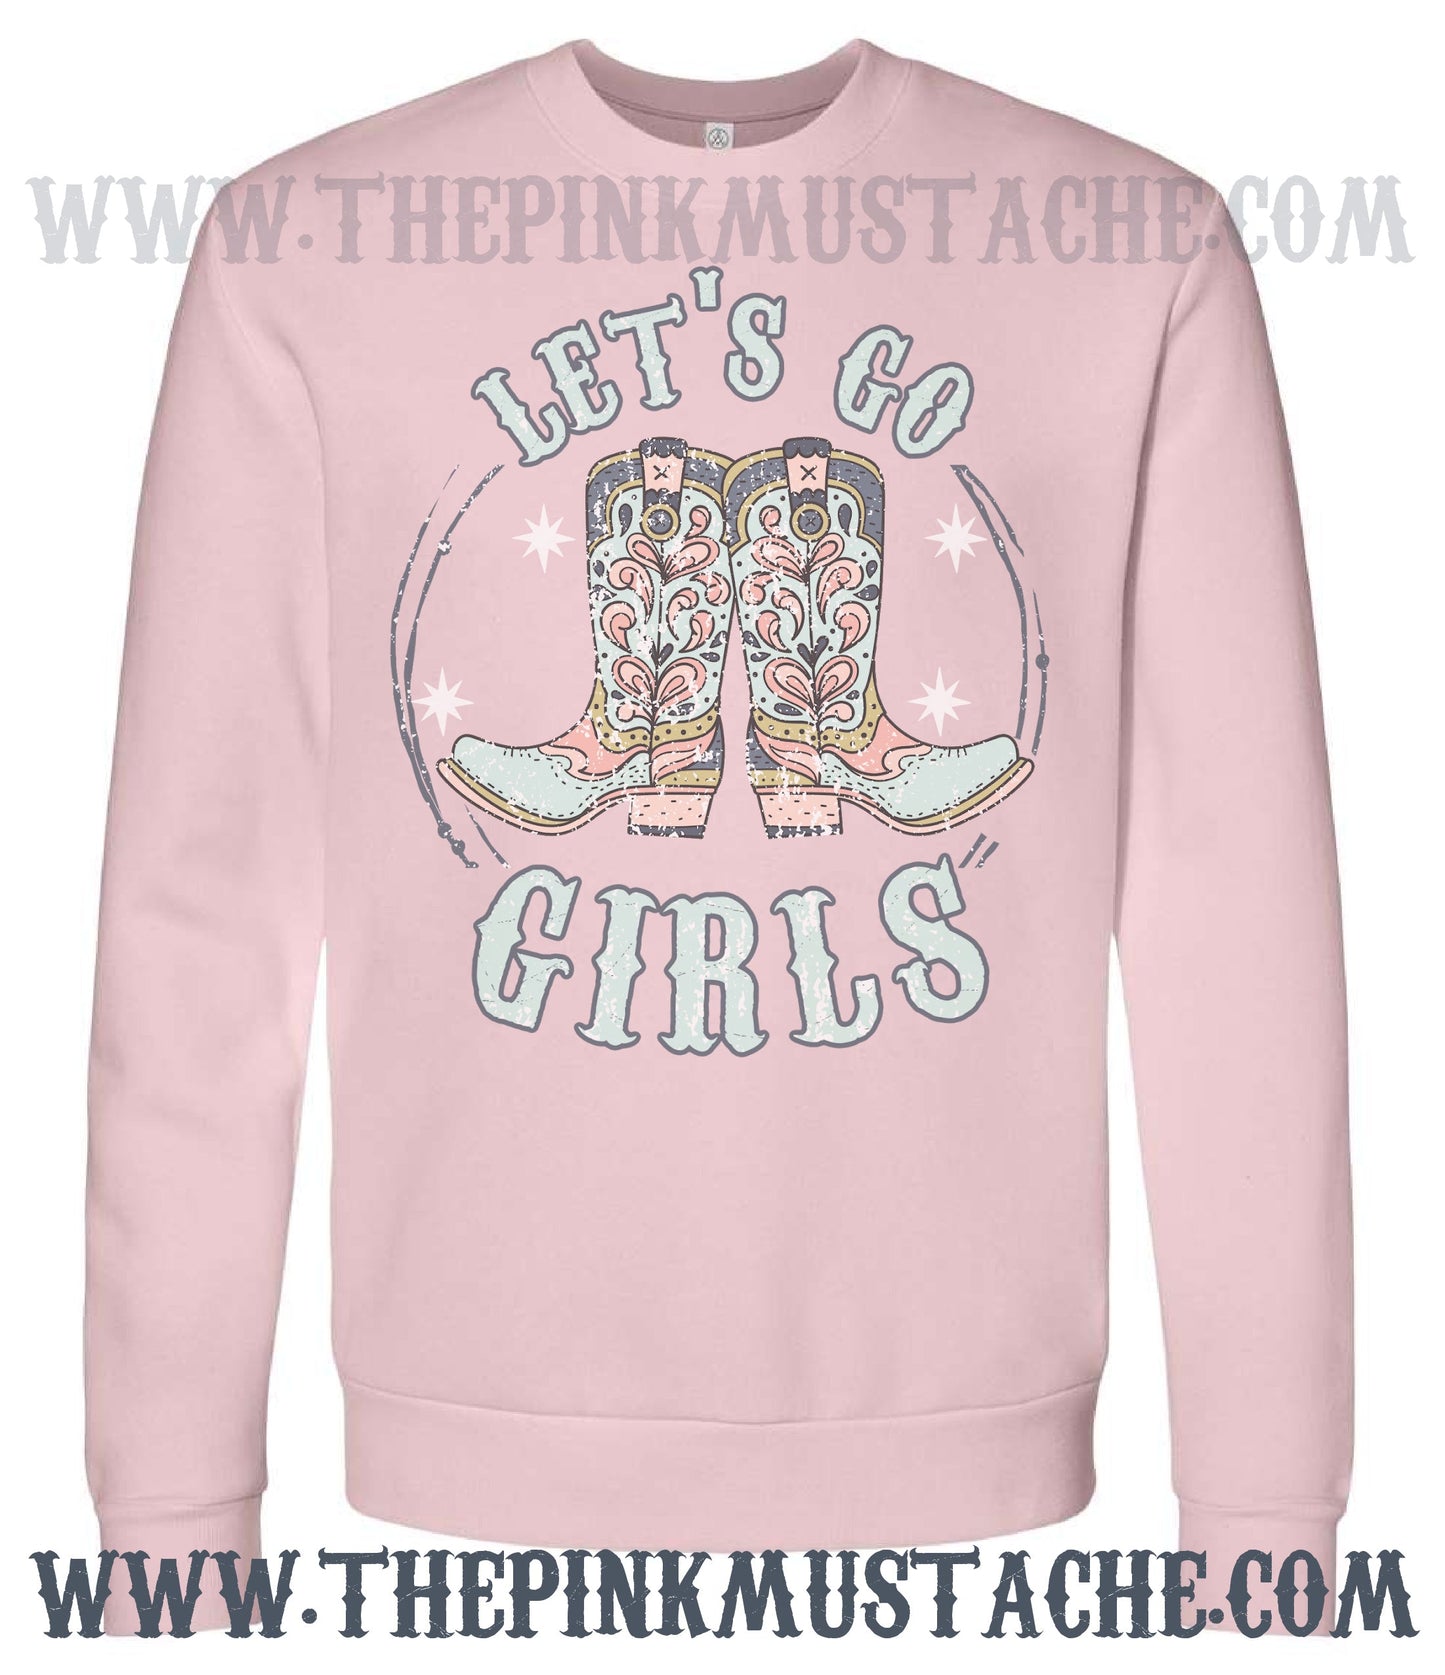 Let's Go Girls - Boots Western Music - Country Music Western Vibes Boutique Softstyle Sweatshirt